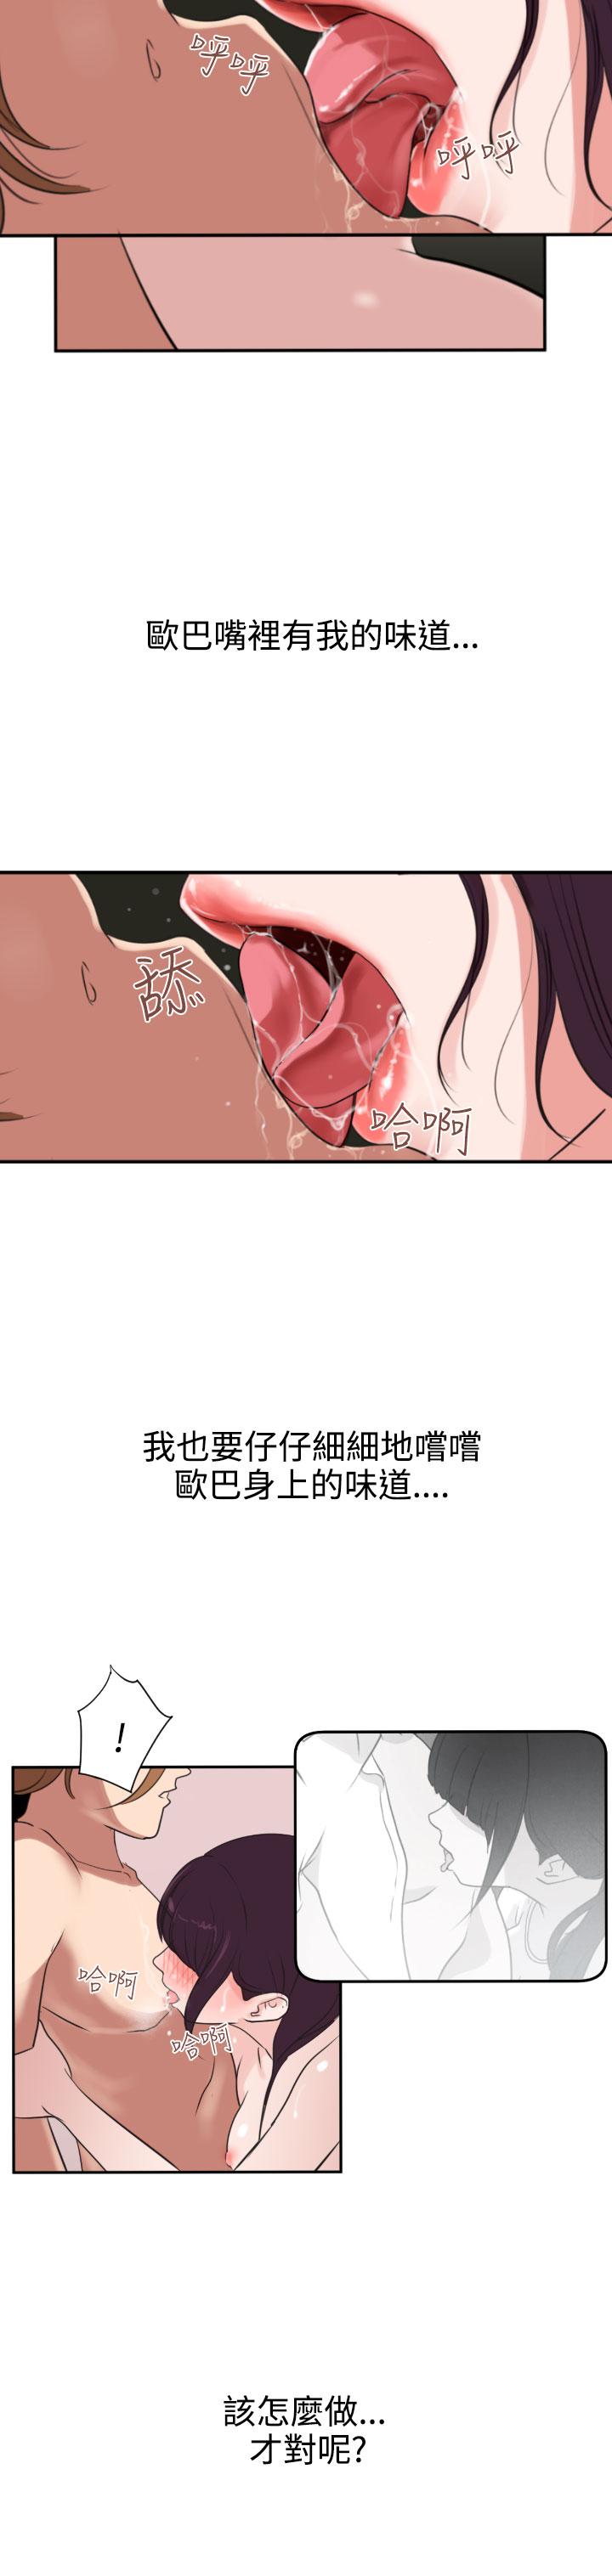 Desire King (慾求王) Ch.1-7 (chinese) 60